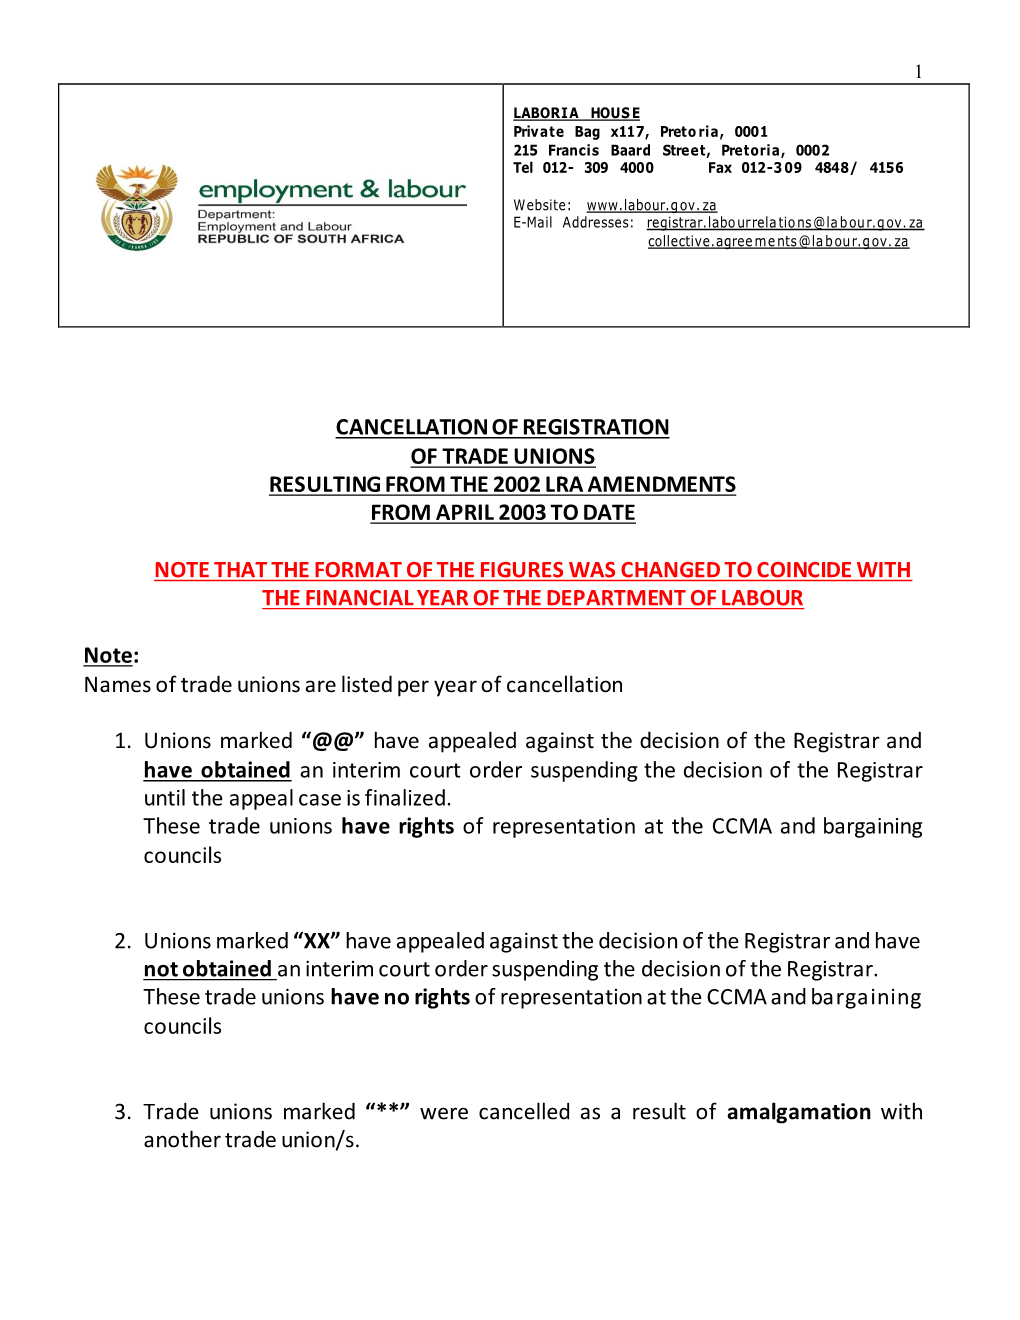 Cancellation of Registration of Trade Unions Resulting from the 2002 Lra Amendments from April 2003 to Date